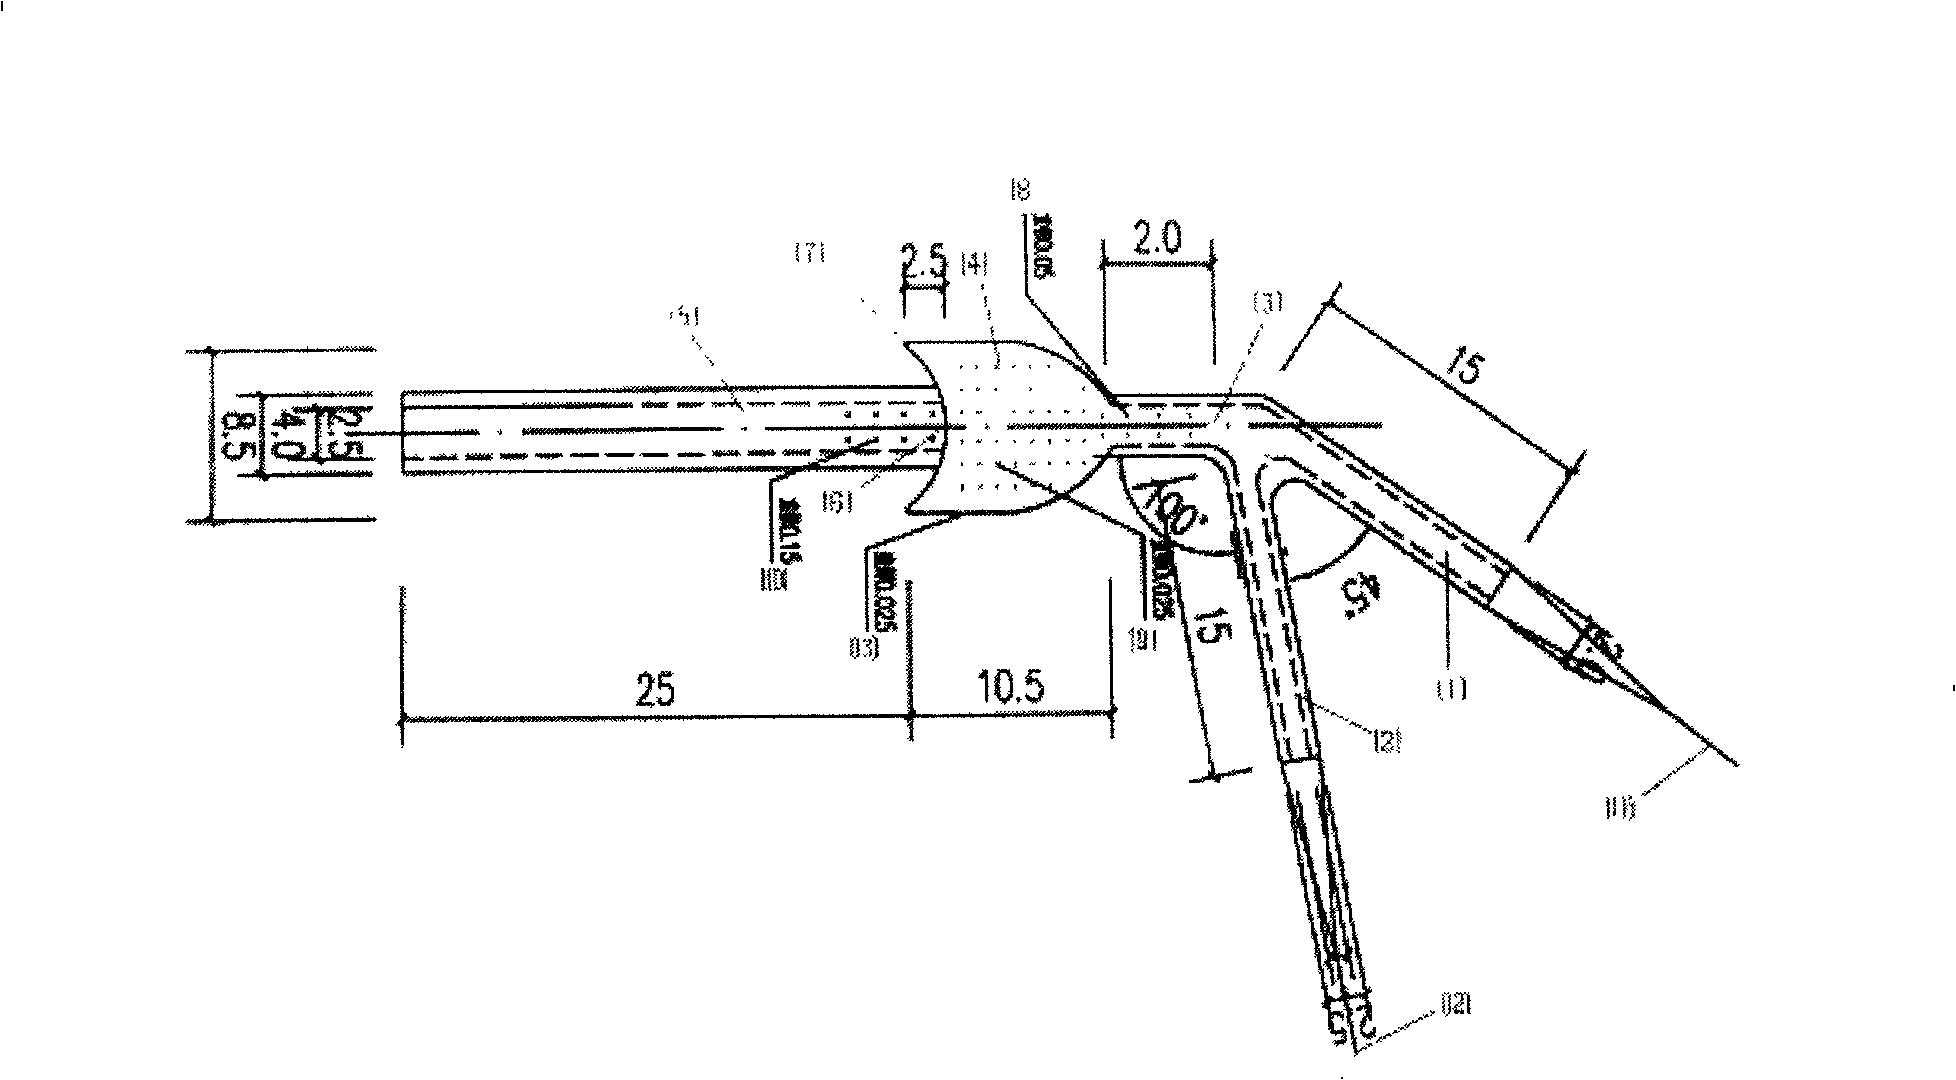 Periodically degrading type tear drainage rebuilding system